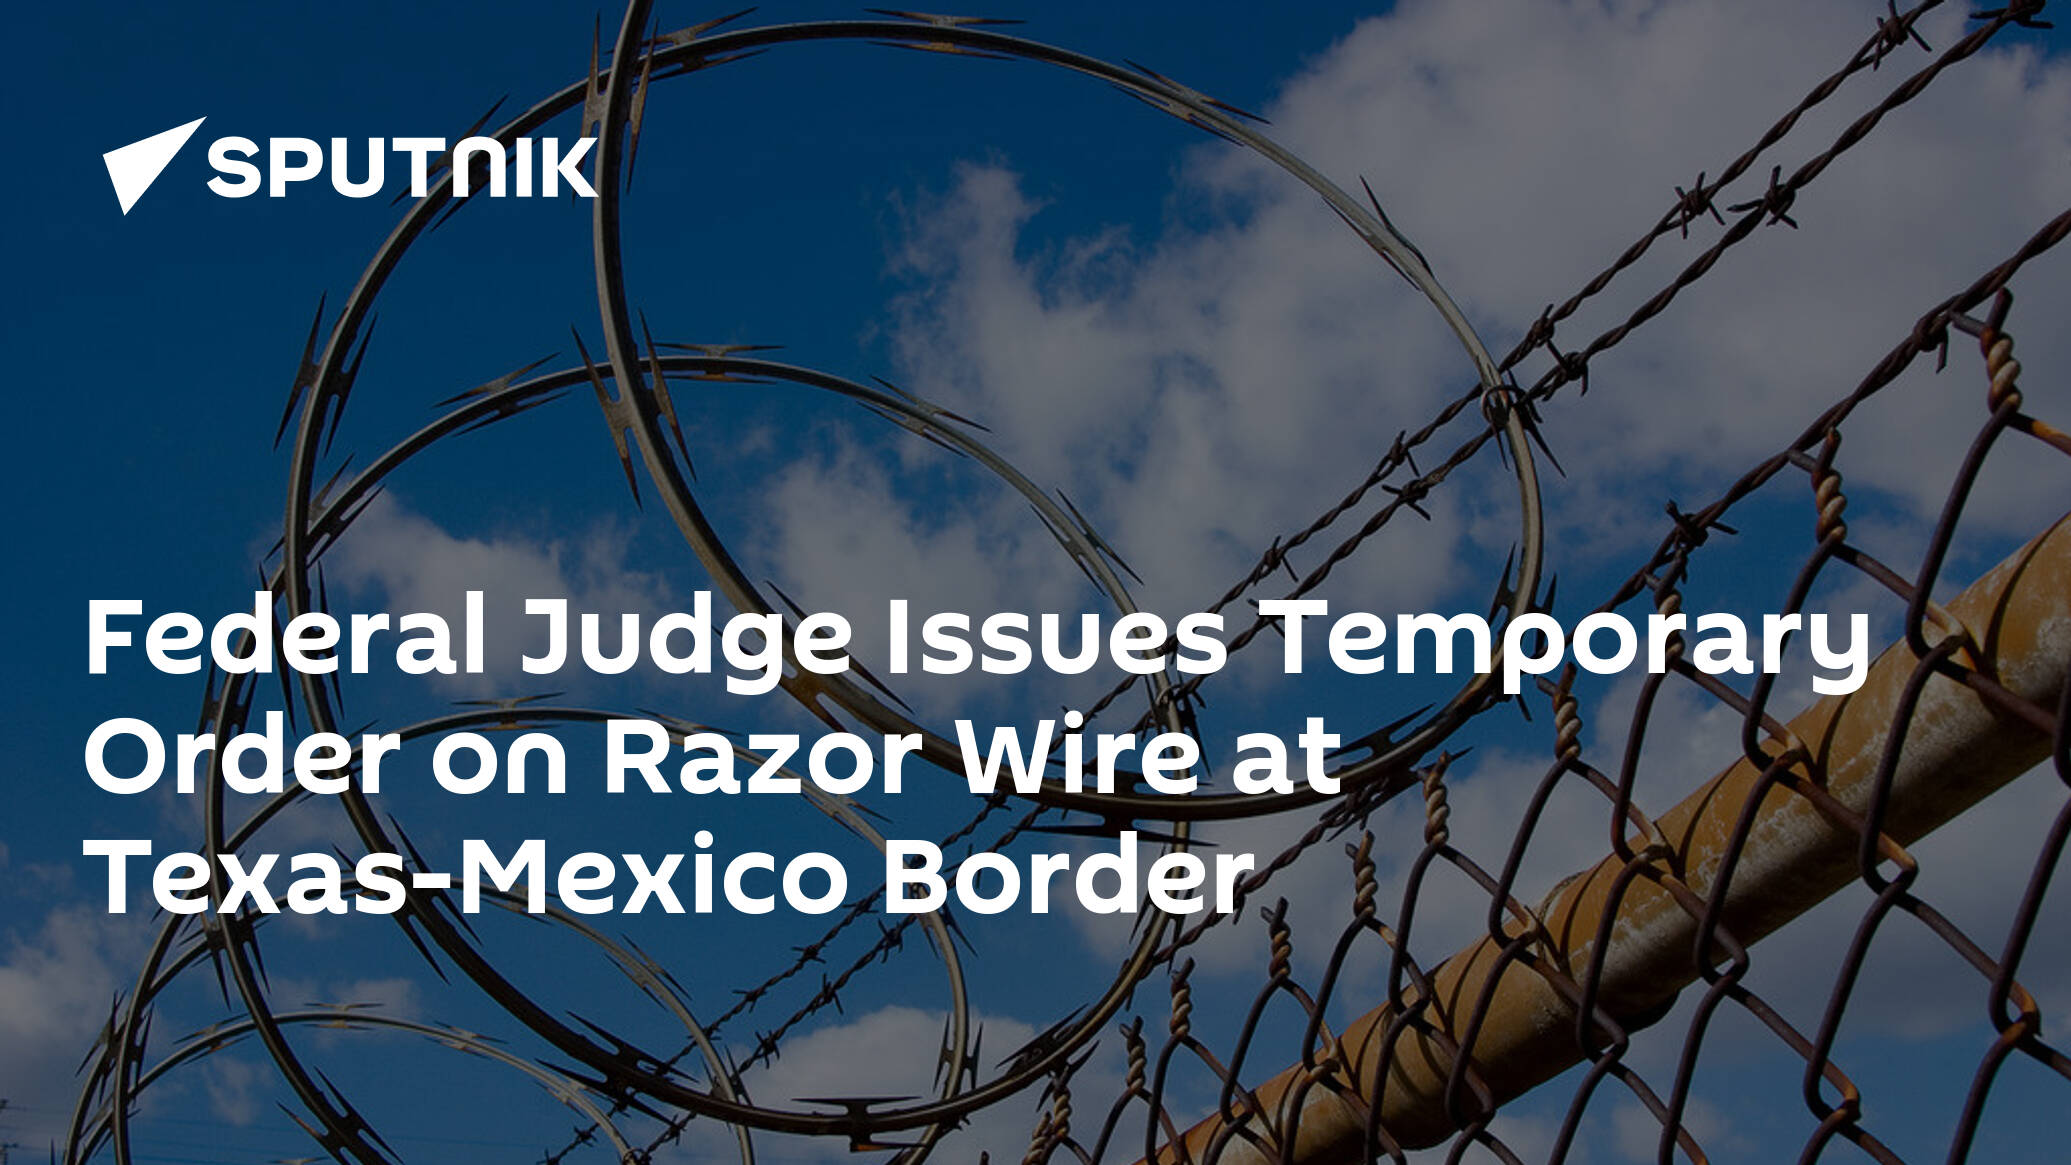 Federal Judge Issues Temporary Order on Razor Wire at Texas-Mexico Border